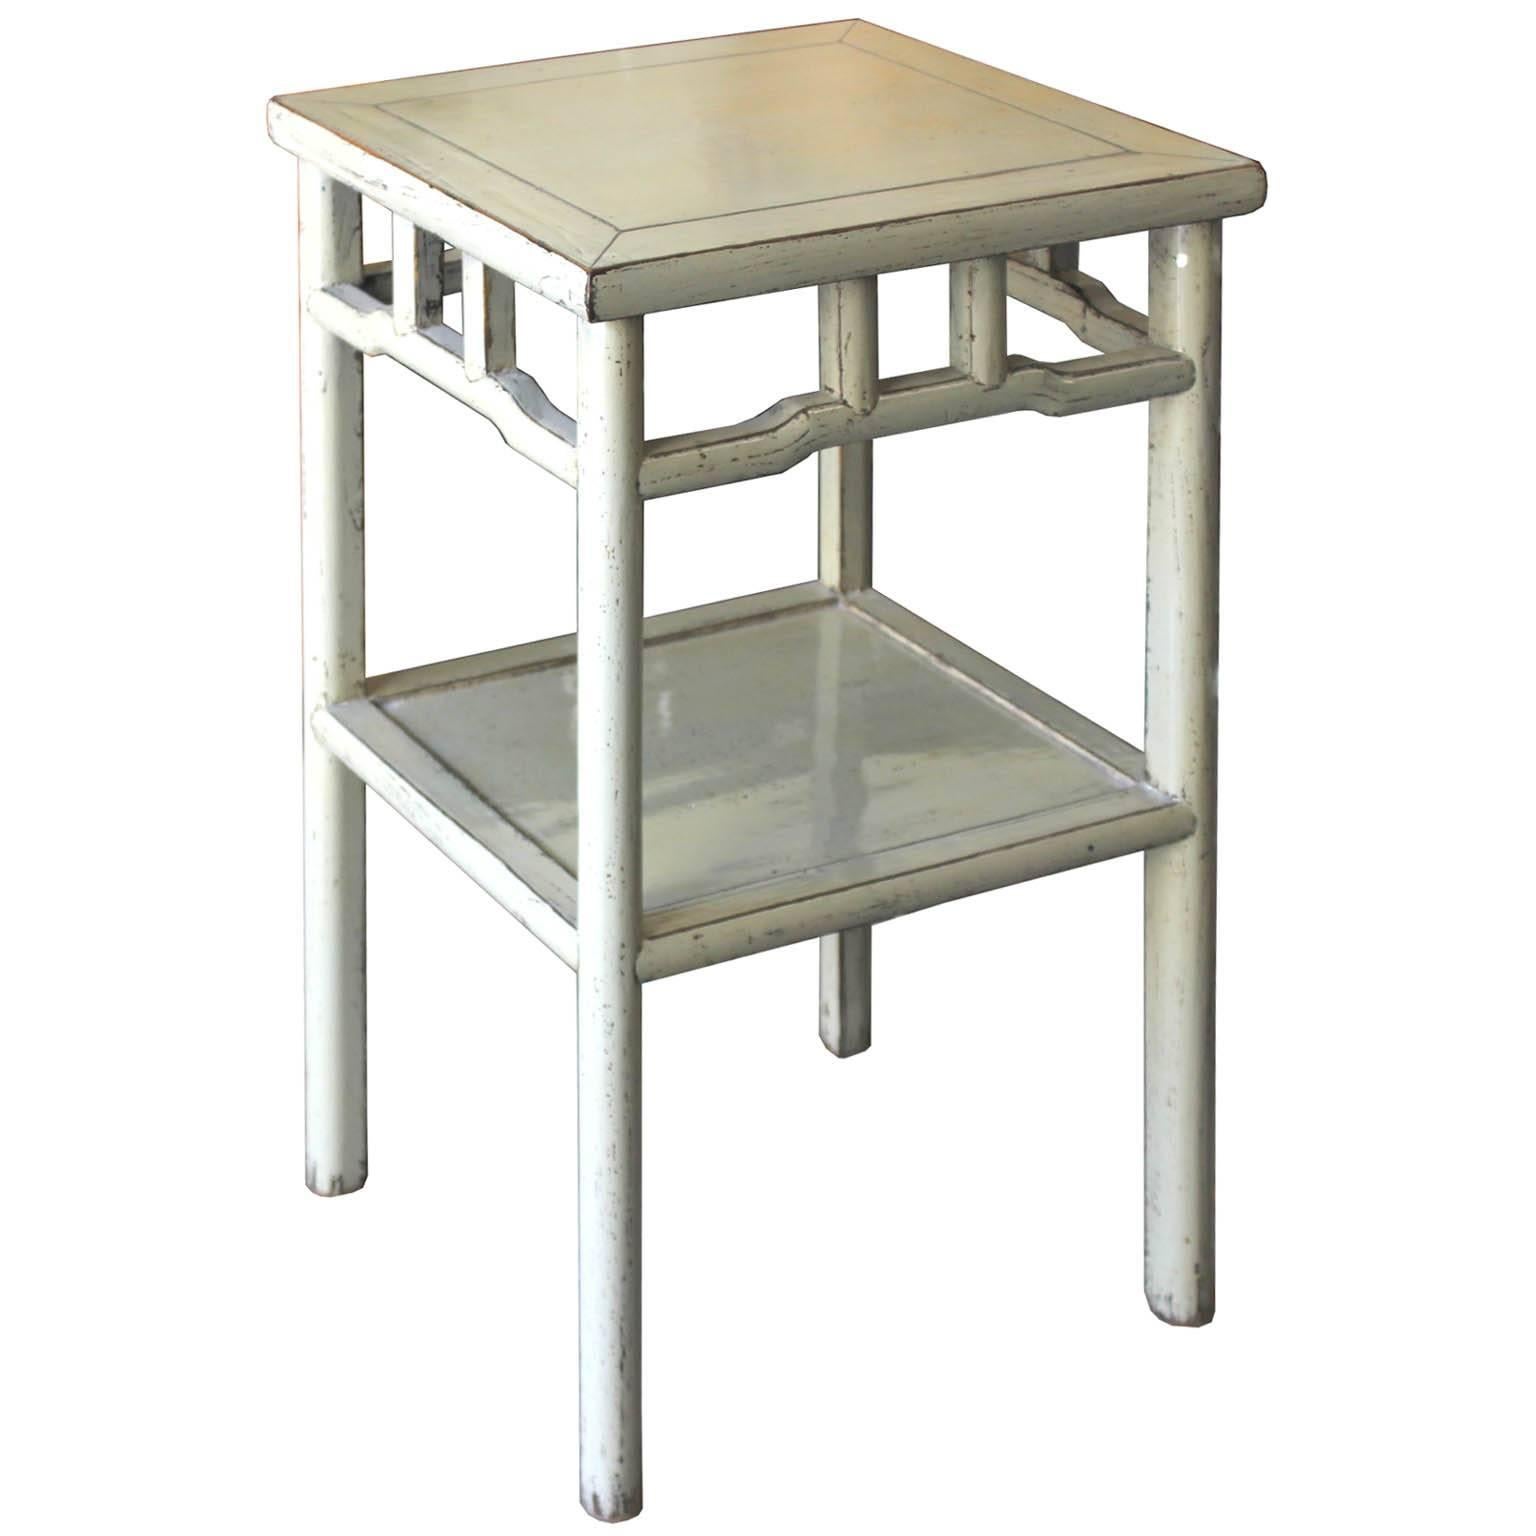 Contemporary light gray lacquer end tables with exposed wood edges and bottom shelf can be used as bedside tables. Available and priced individually.